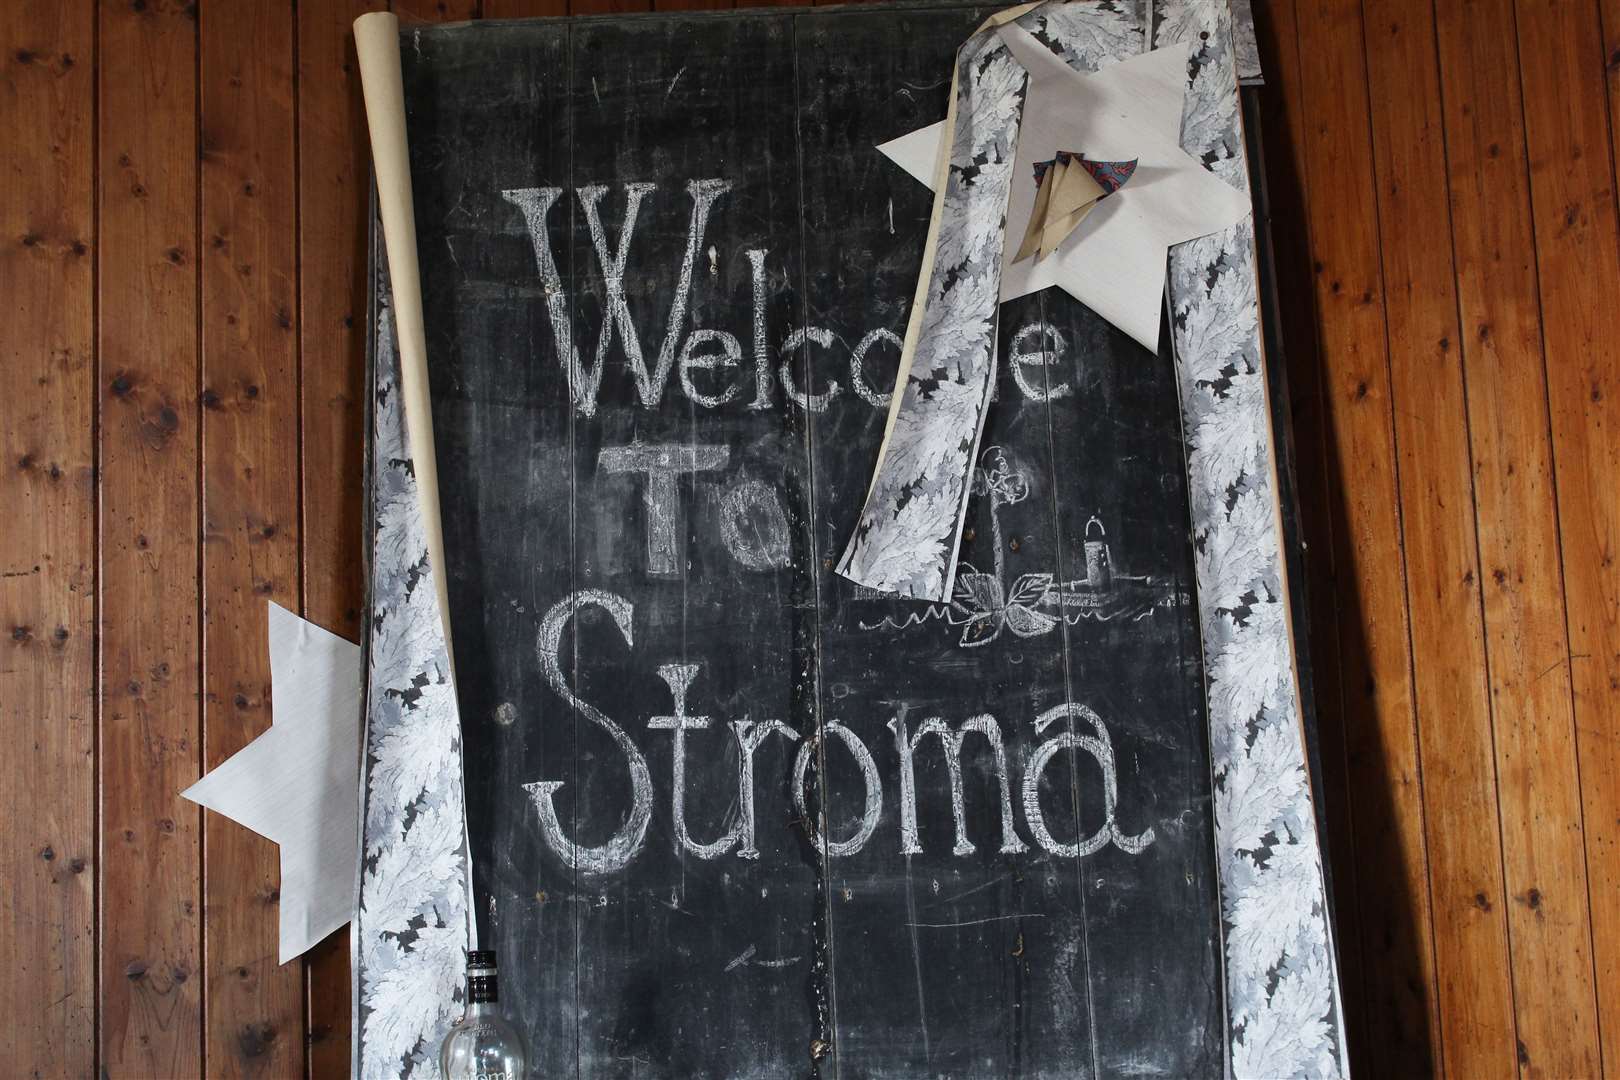 A welcome message in the former Stroma schoolroom. Picture: Alan Hendry